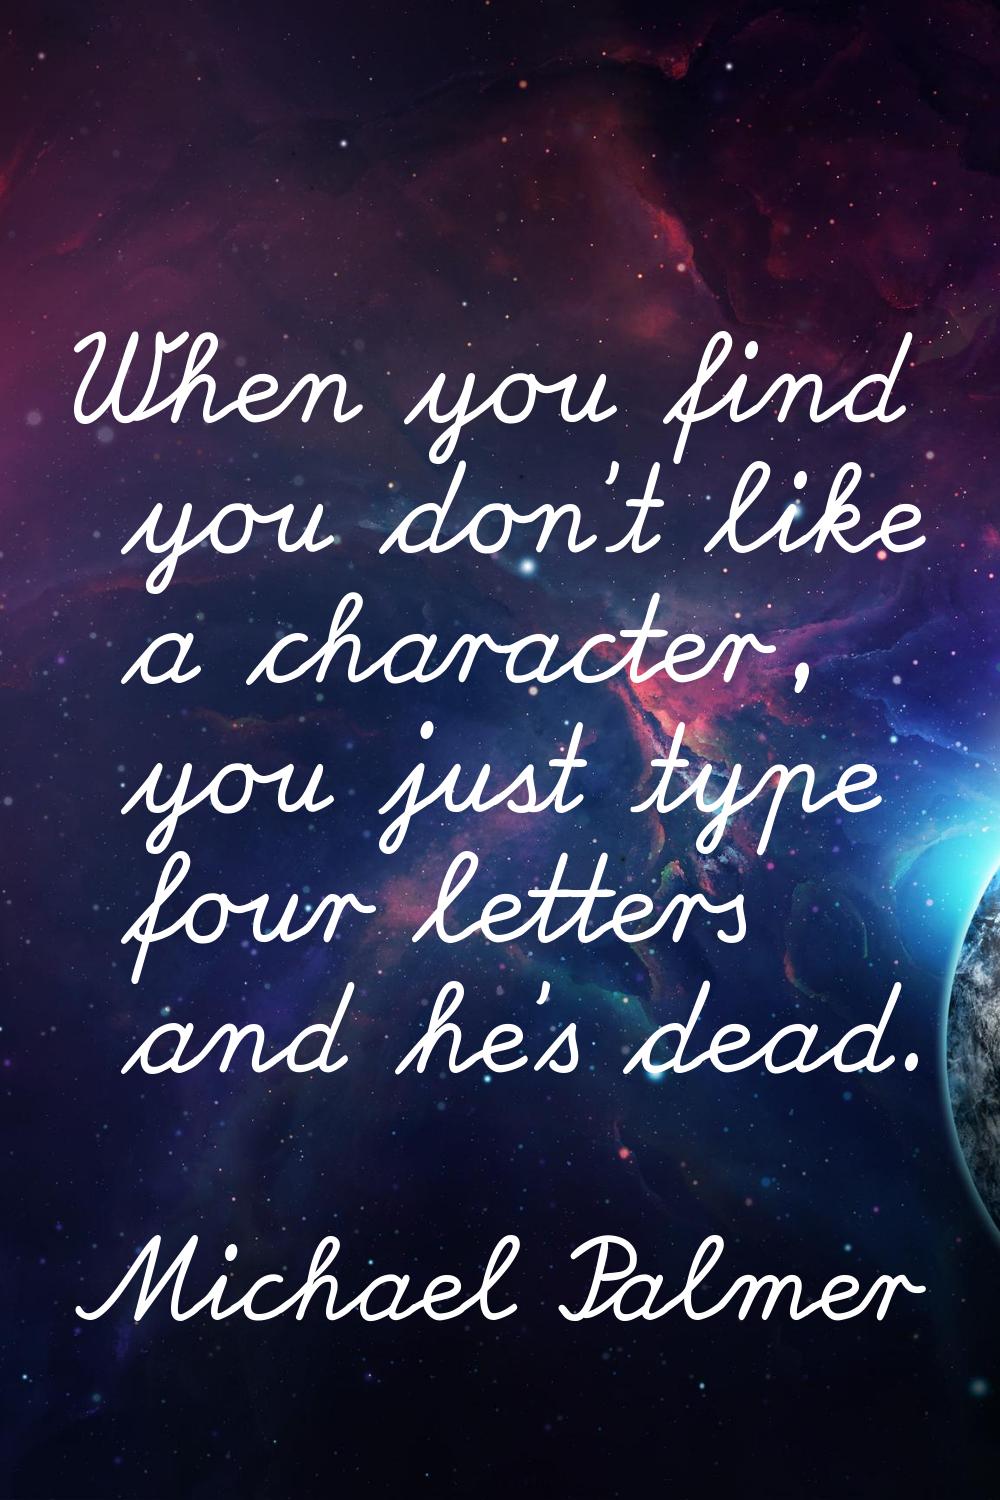 When you find you don't like a character, you just type four letters and he's dead.